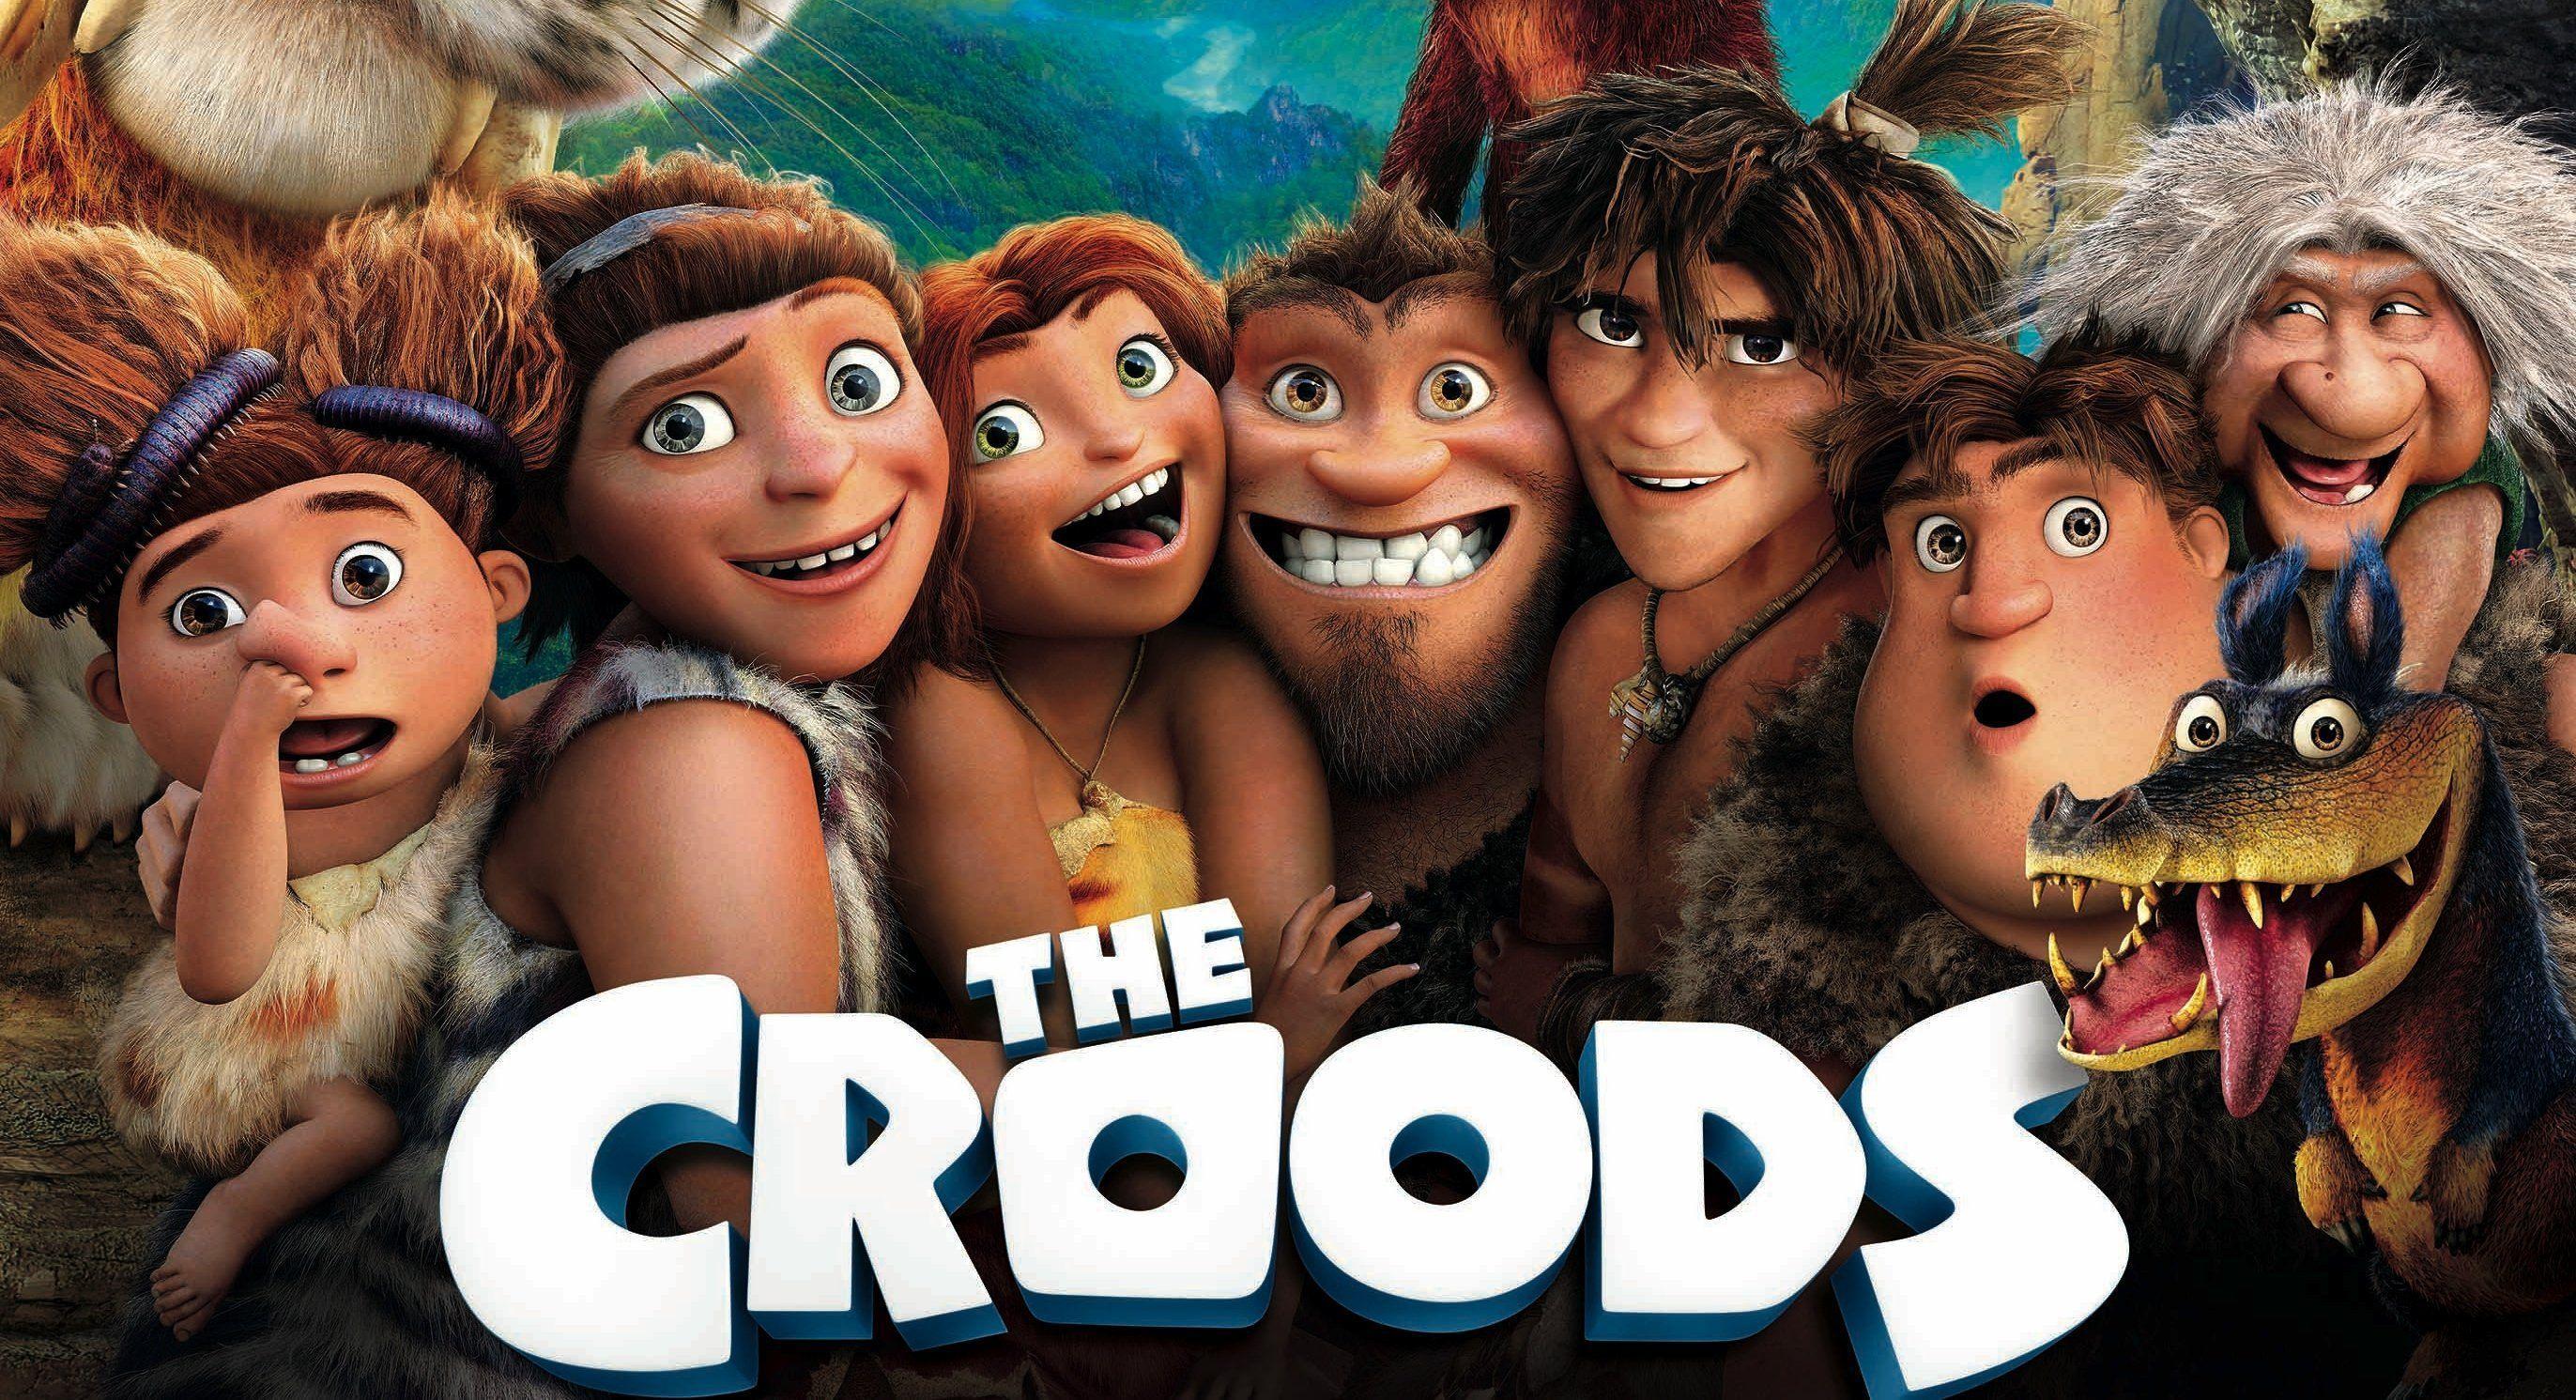 THE CROODS Animation Adventure comedy family fantasy 1croods